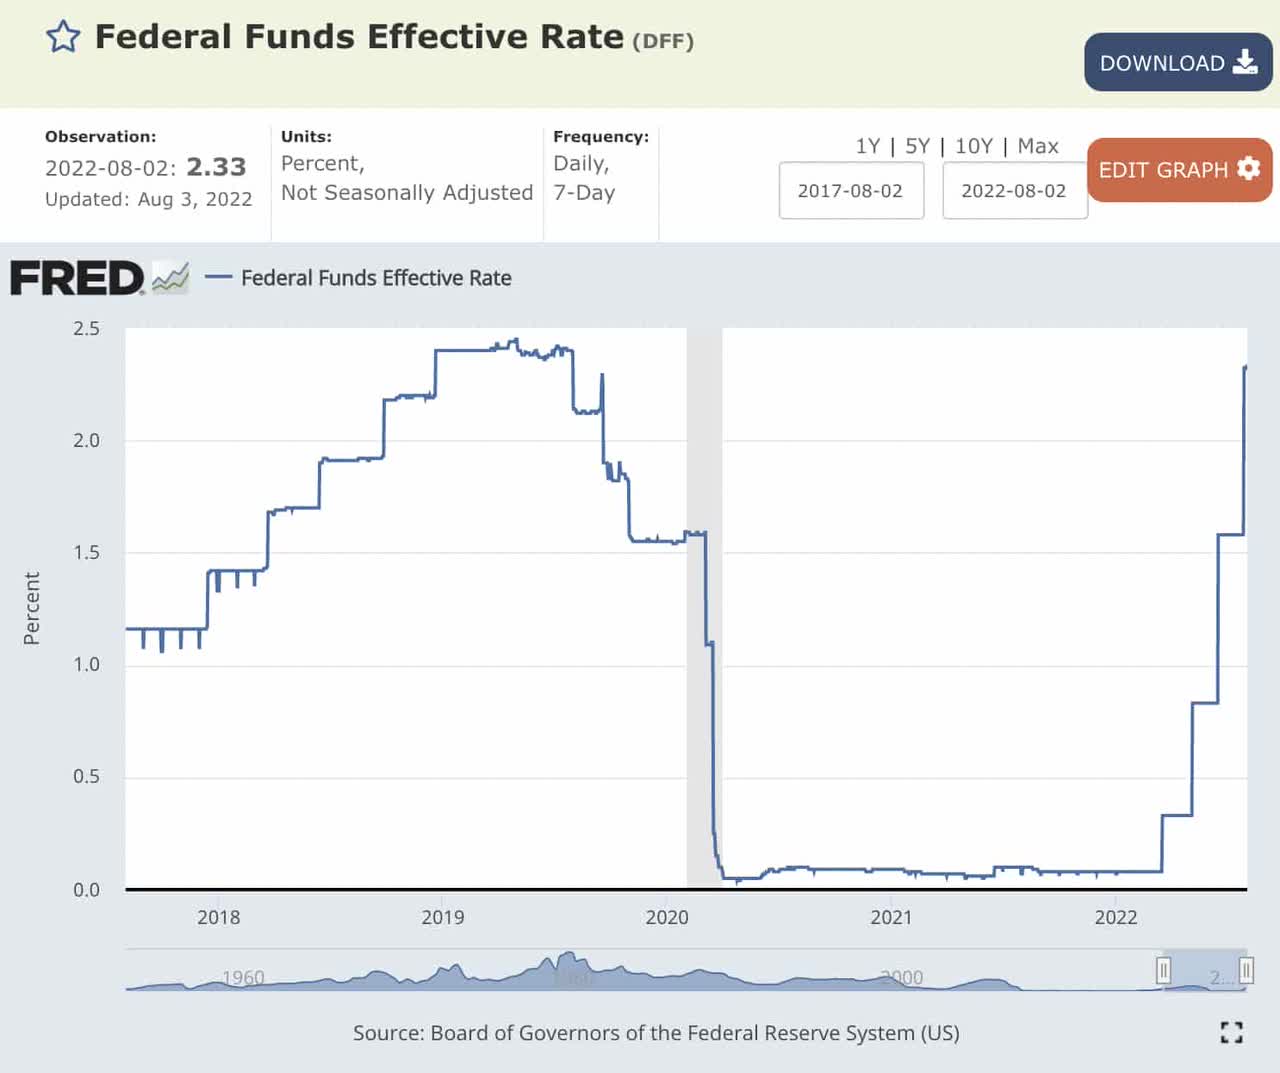 Historical Federal Funds Effective Rate